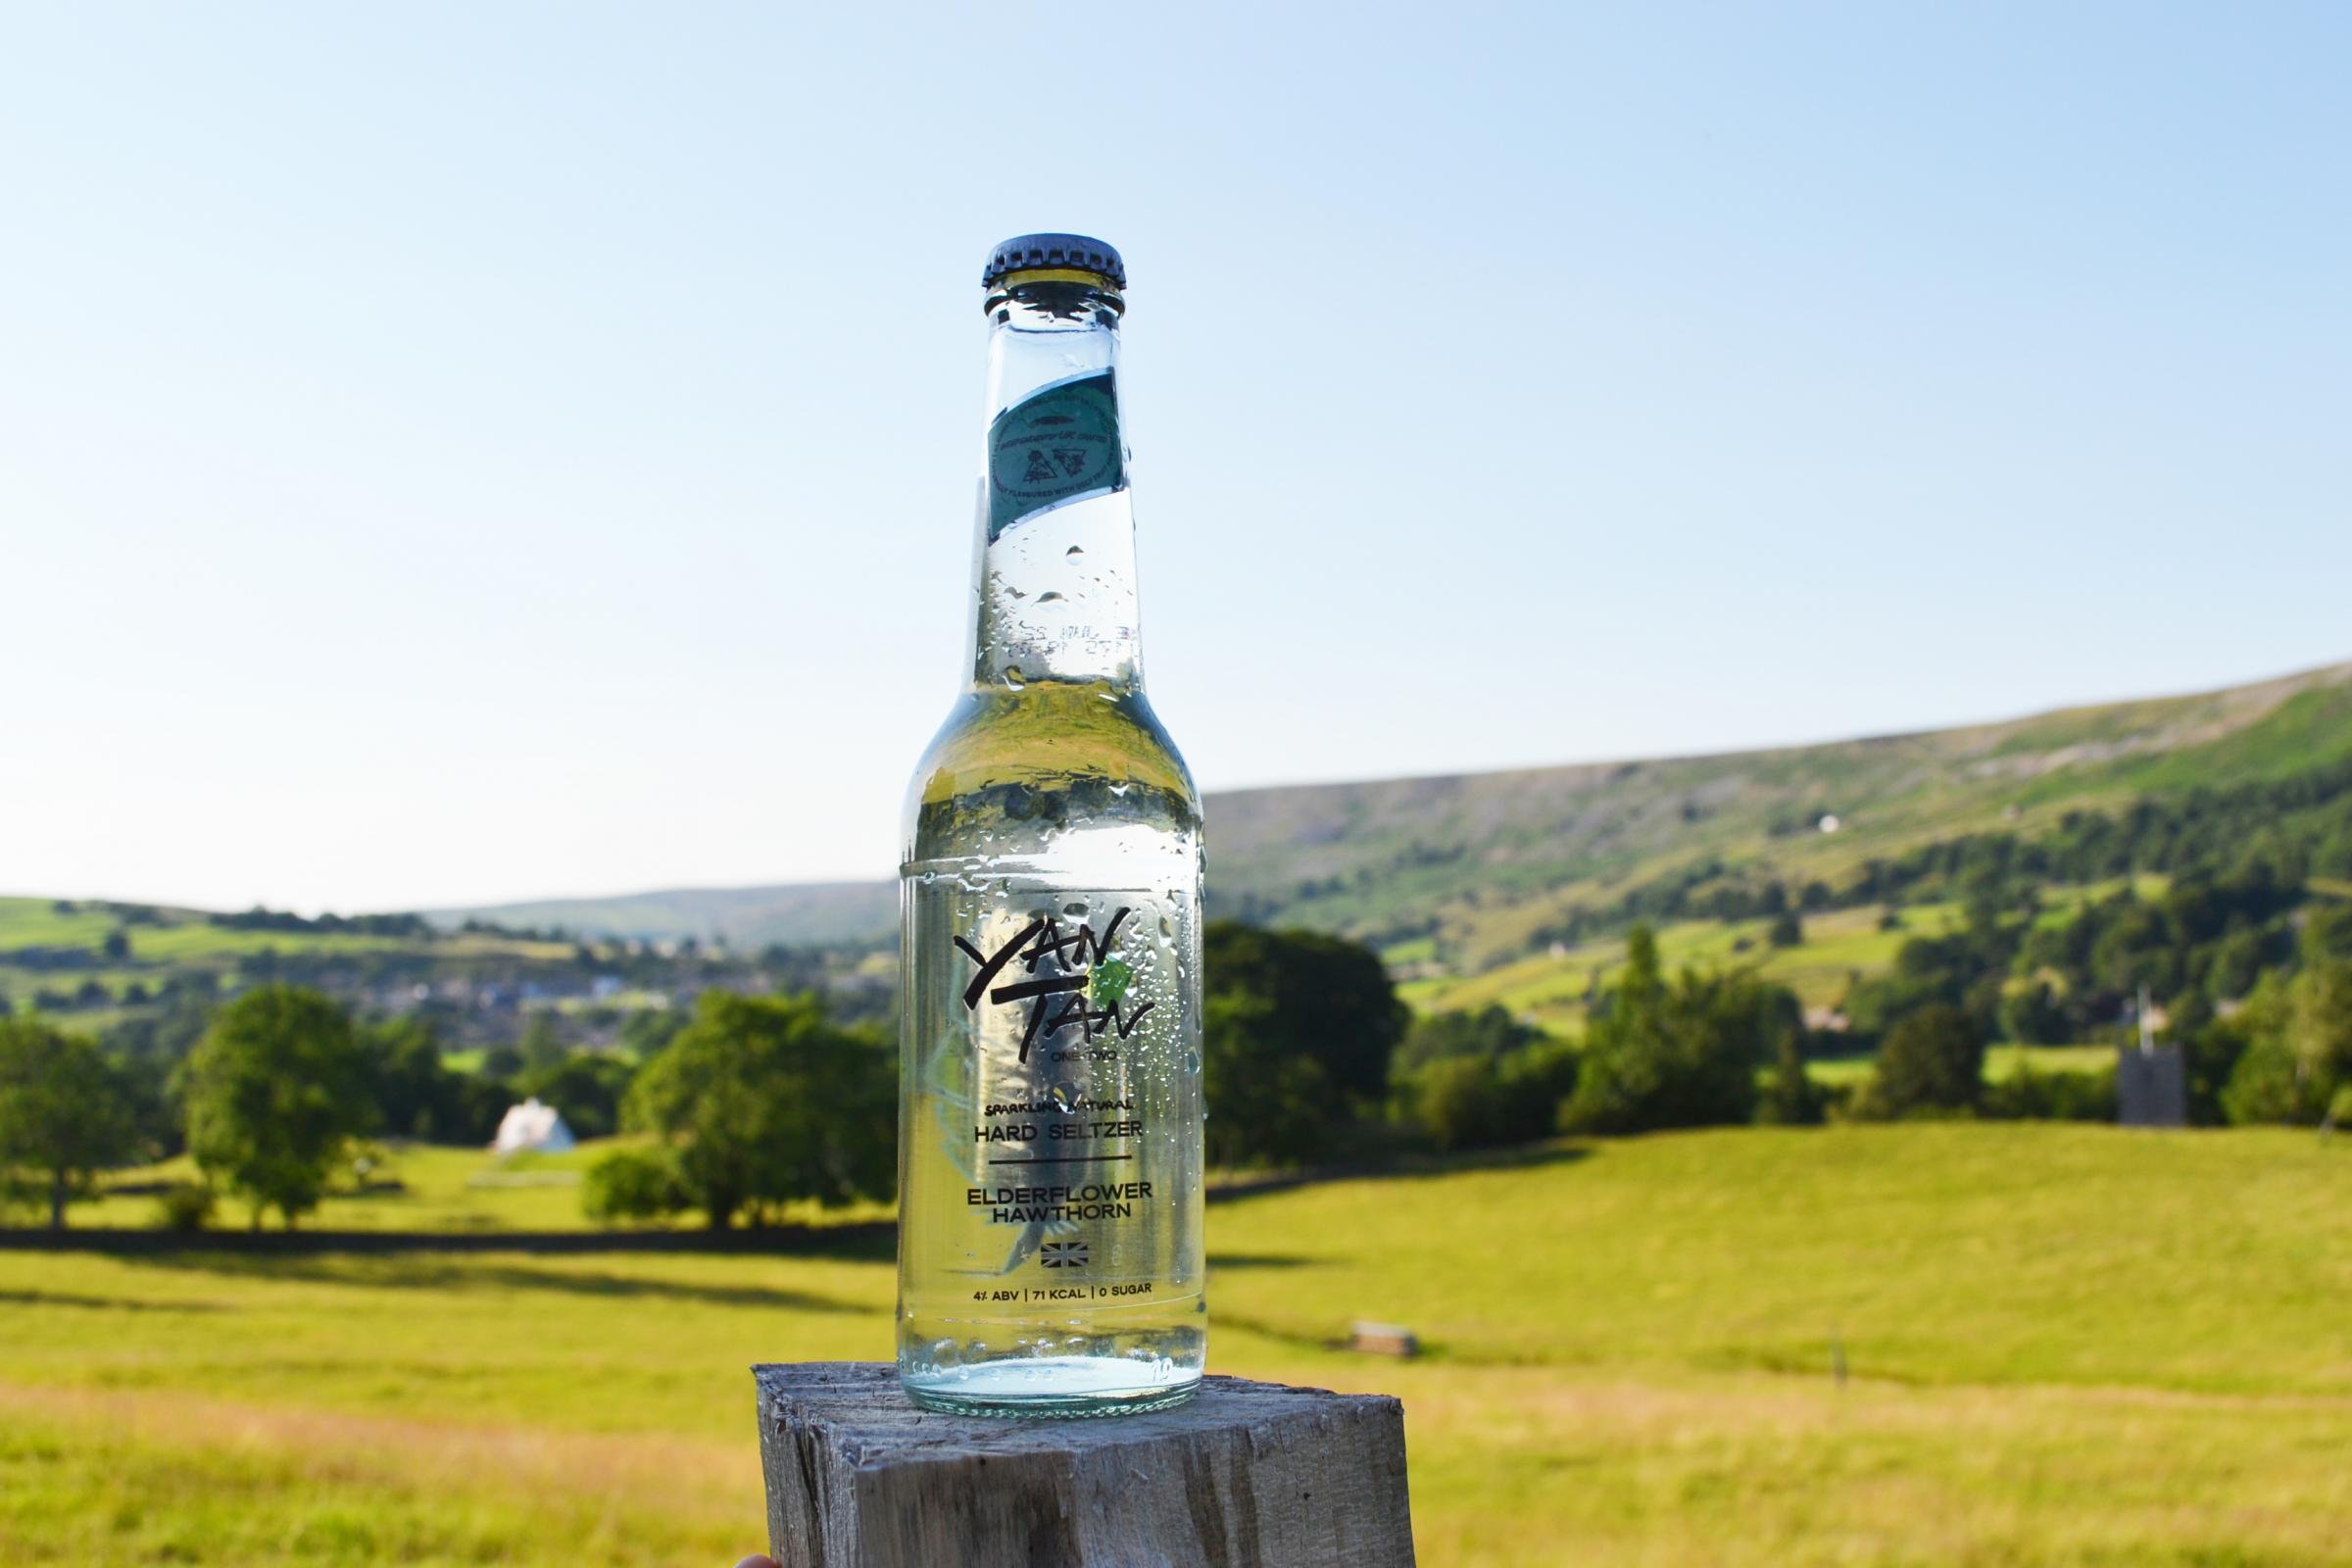 The name of Yan Tan seltzer was inspired by Swaledale